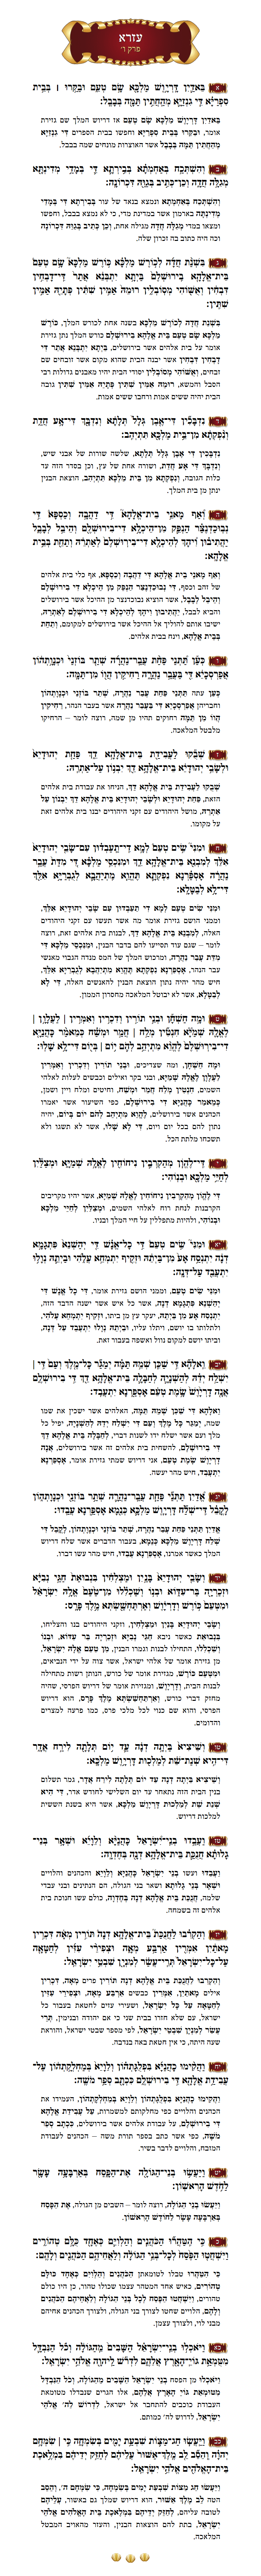 Sefer Ezra Chapter 6 with commentary